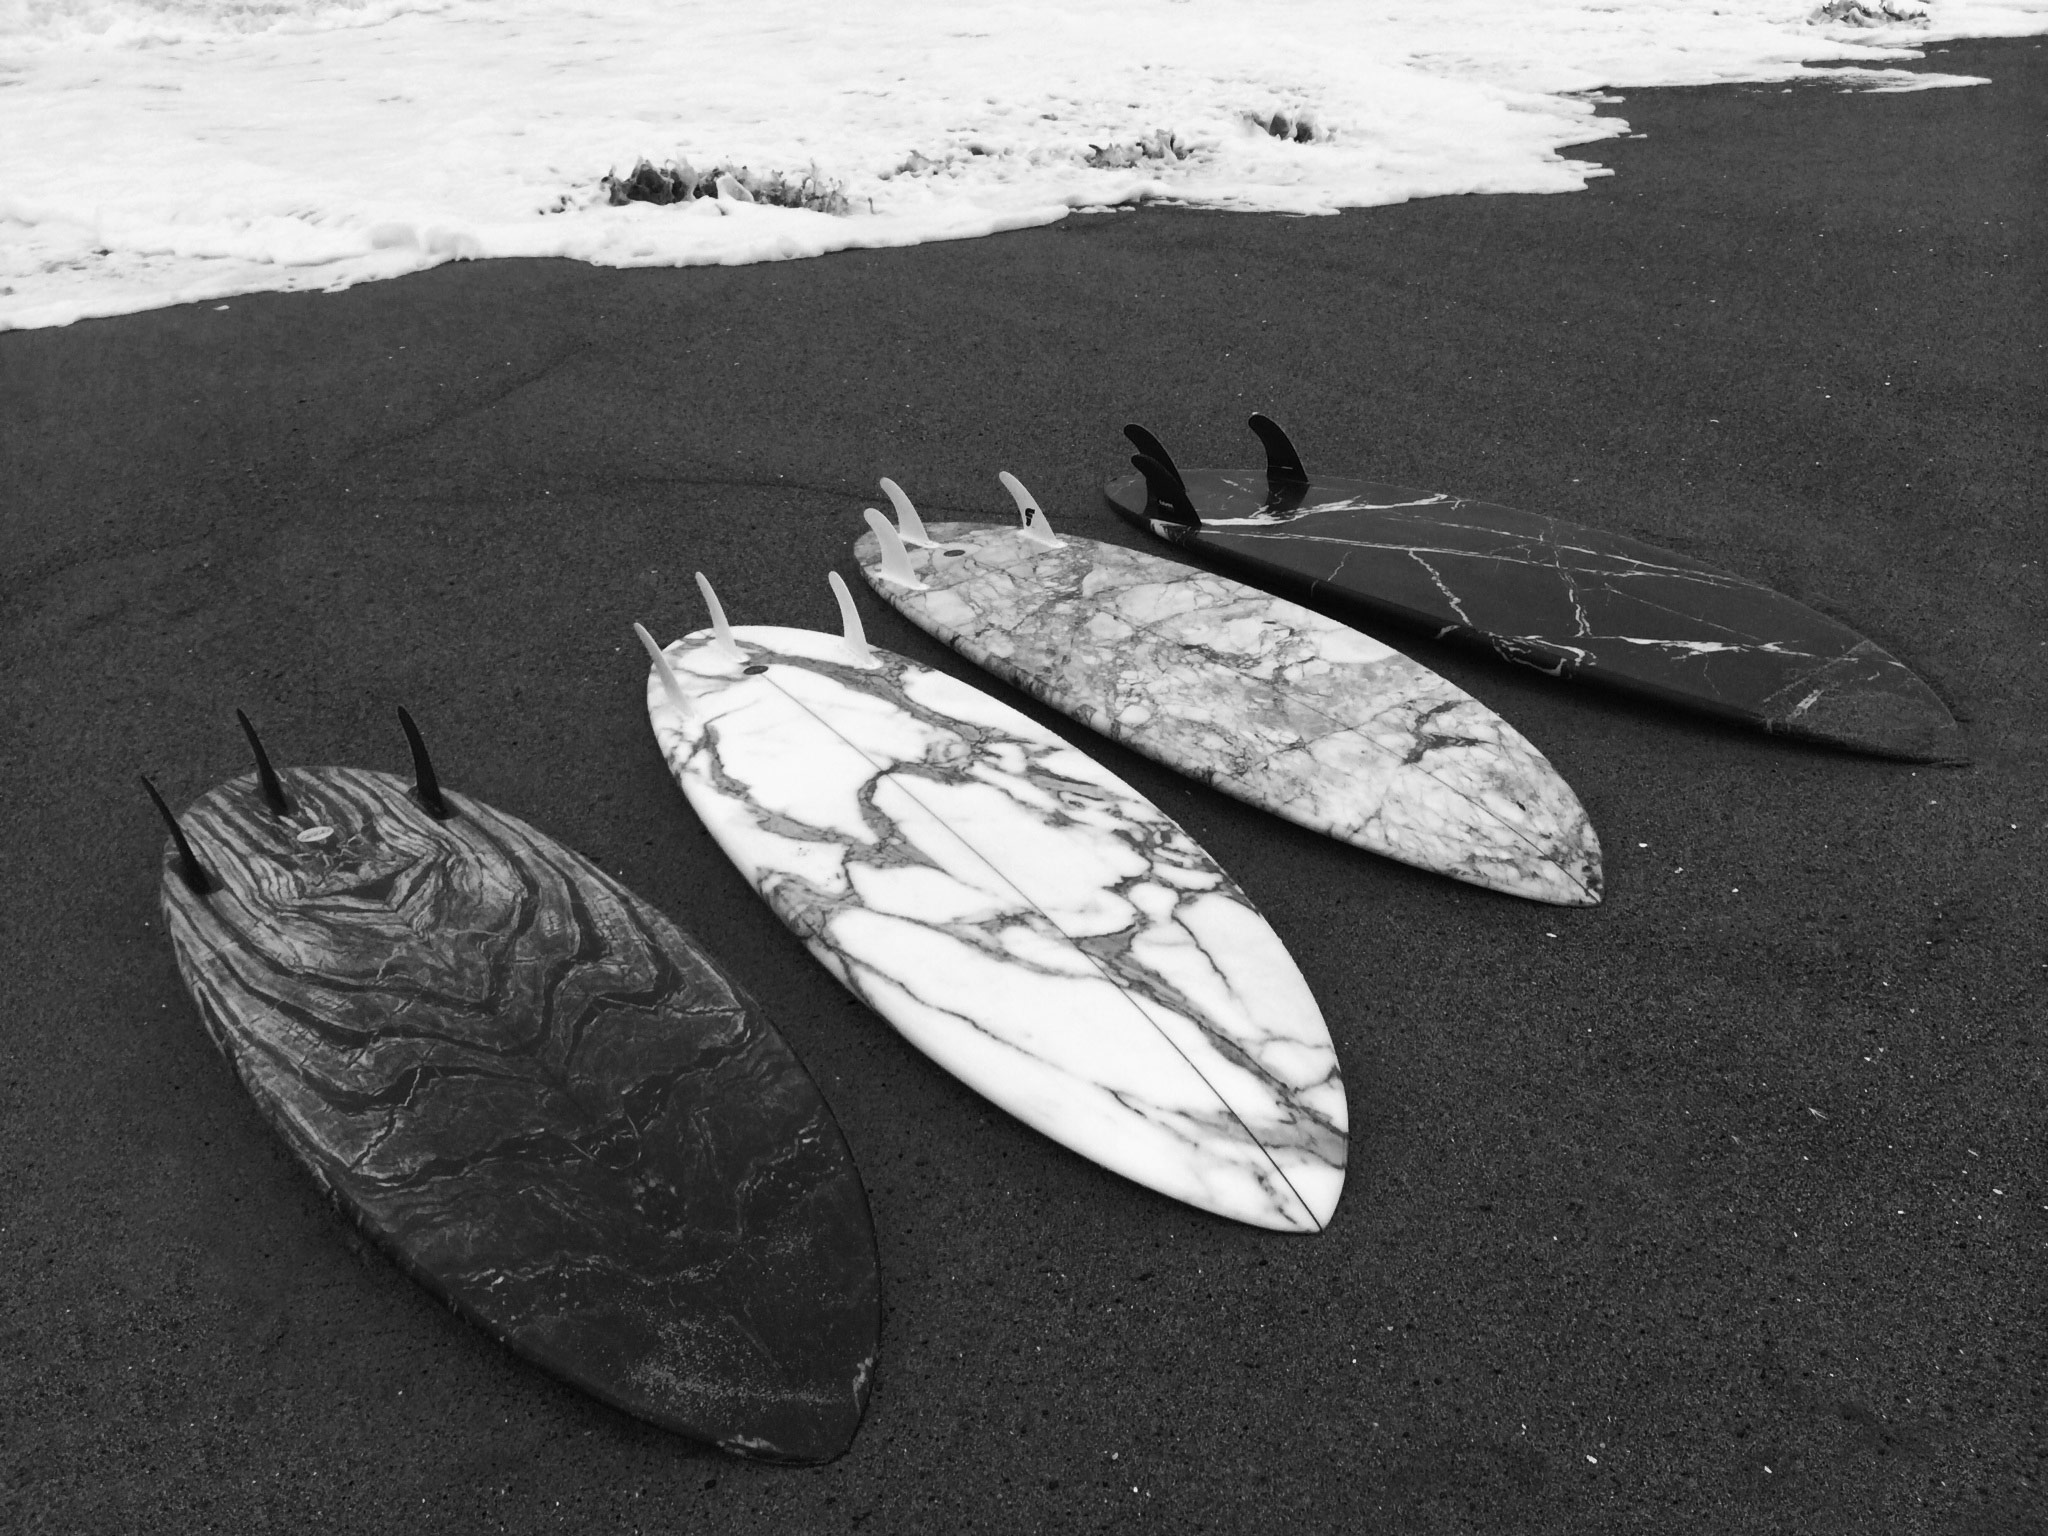 Marble surfboards co-developed with Alexander Wang and Haydenshapes